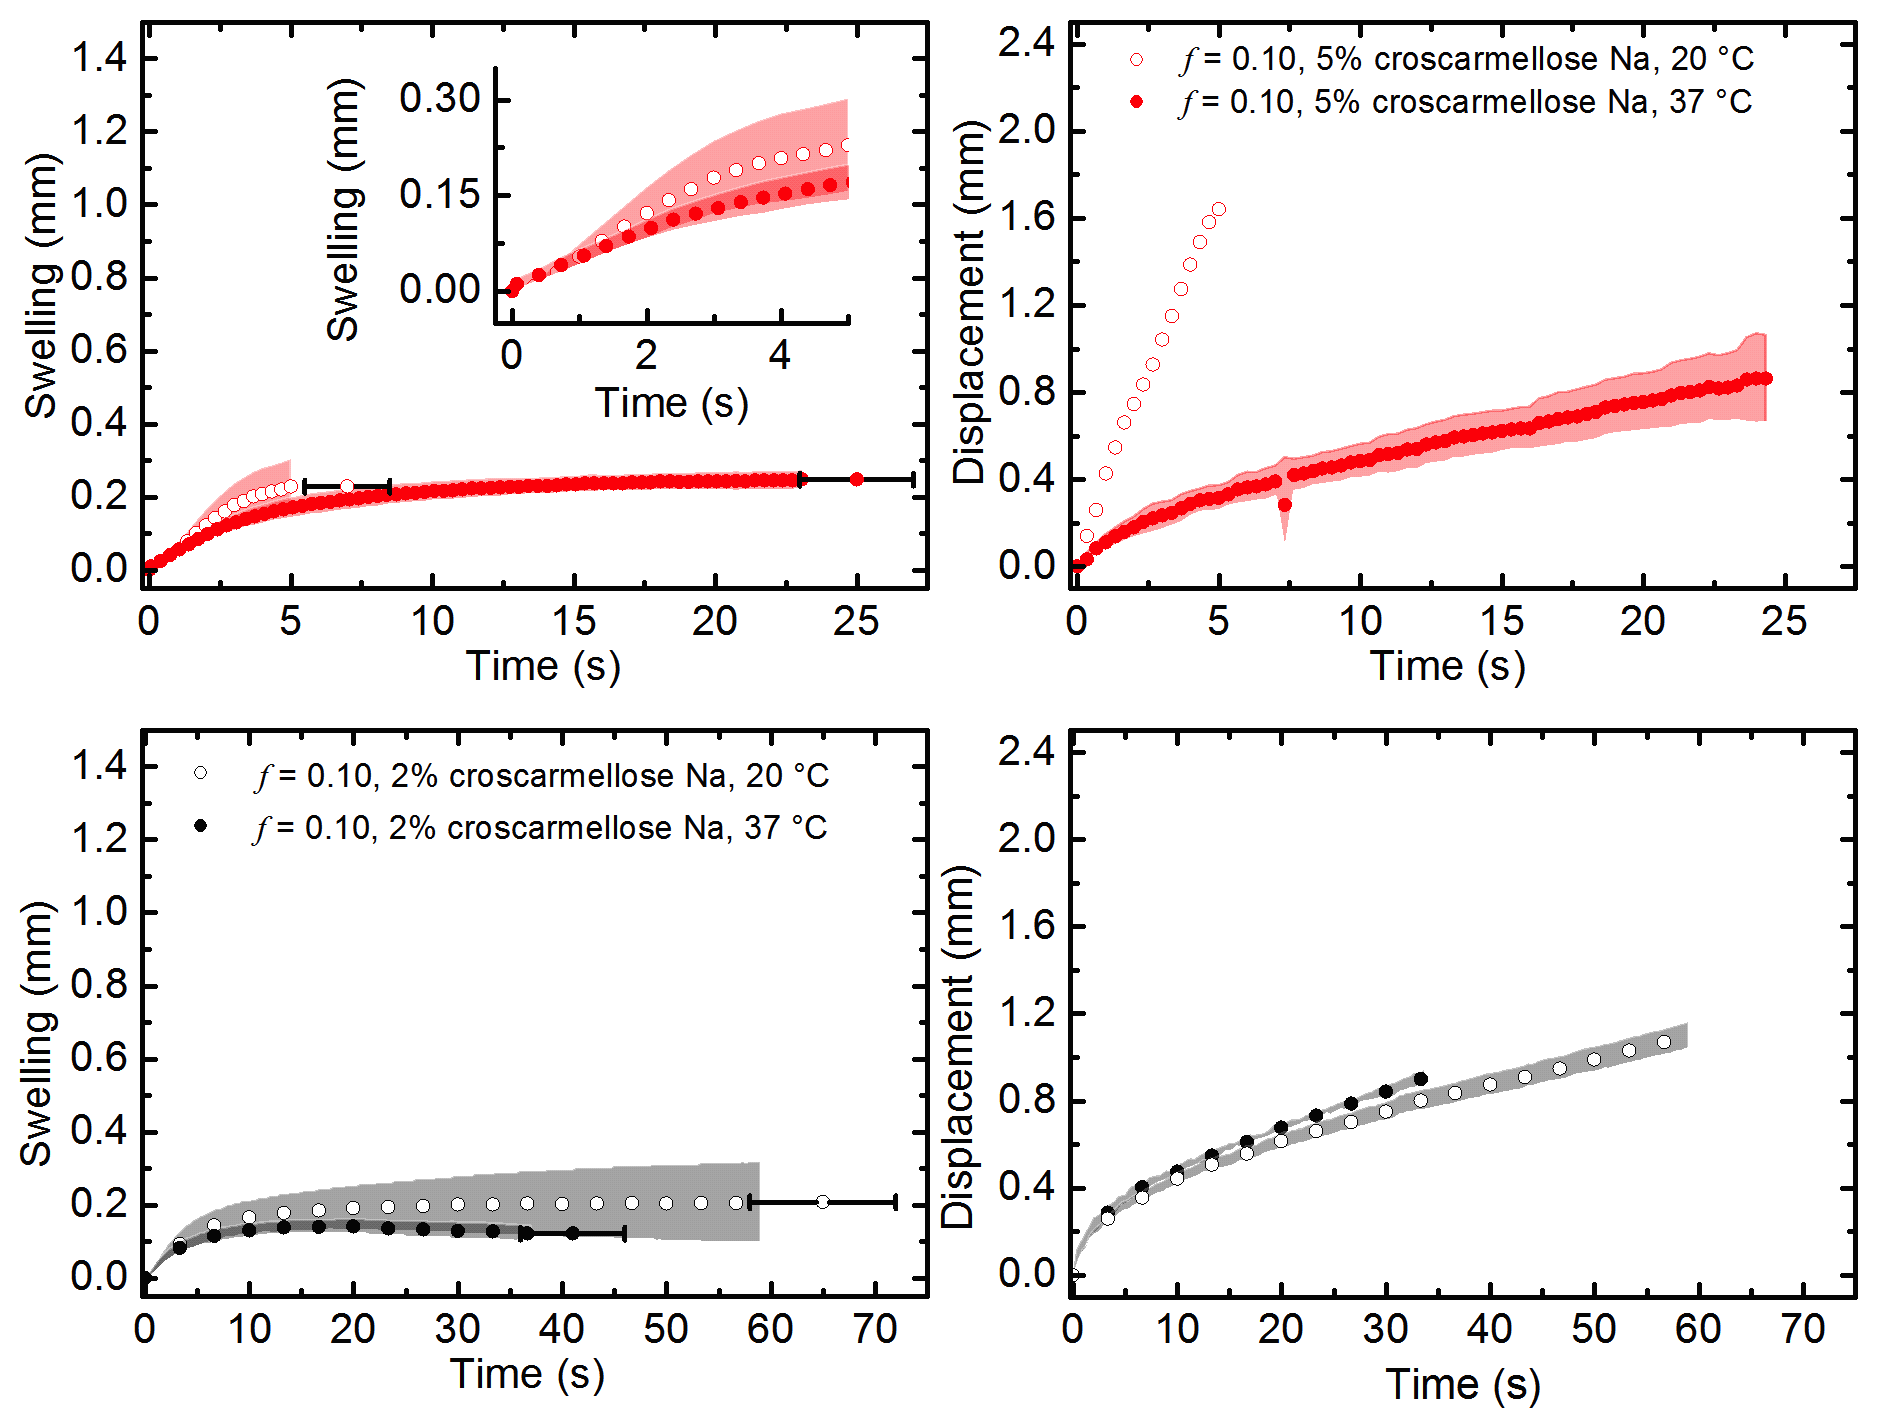 Disintegration characteristics of tablets made from MCC and superdisintegrant at different concentrations and water temperature (modified from [1]).